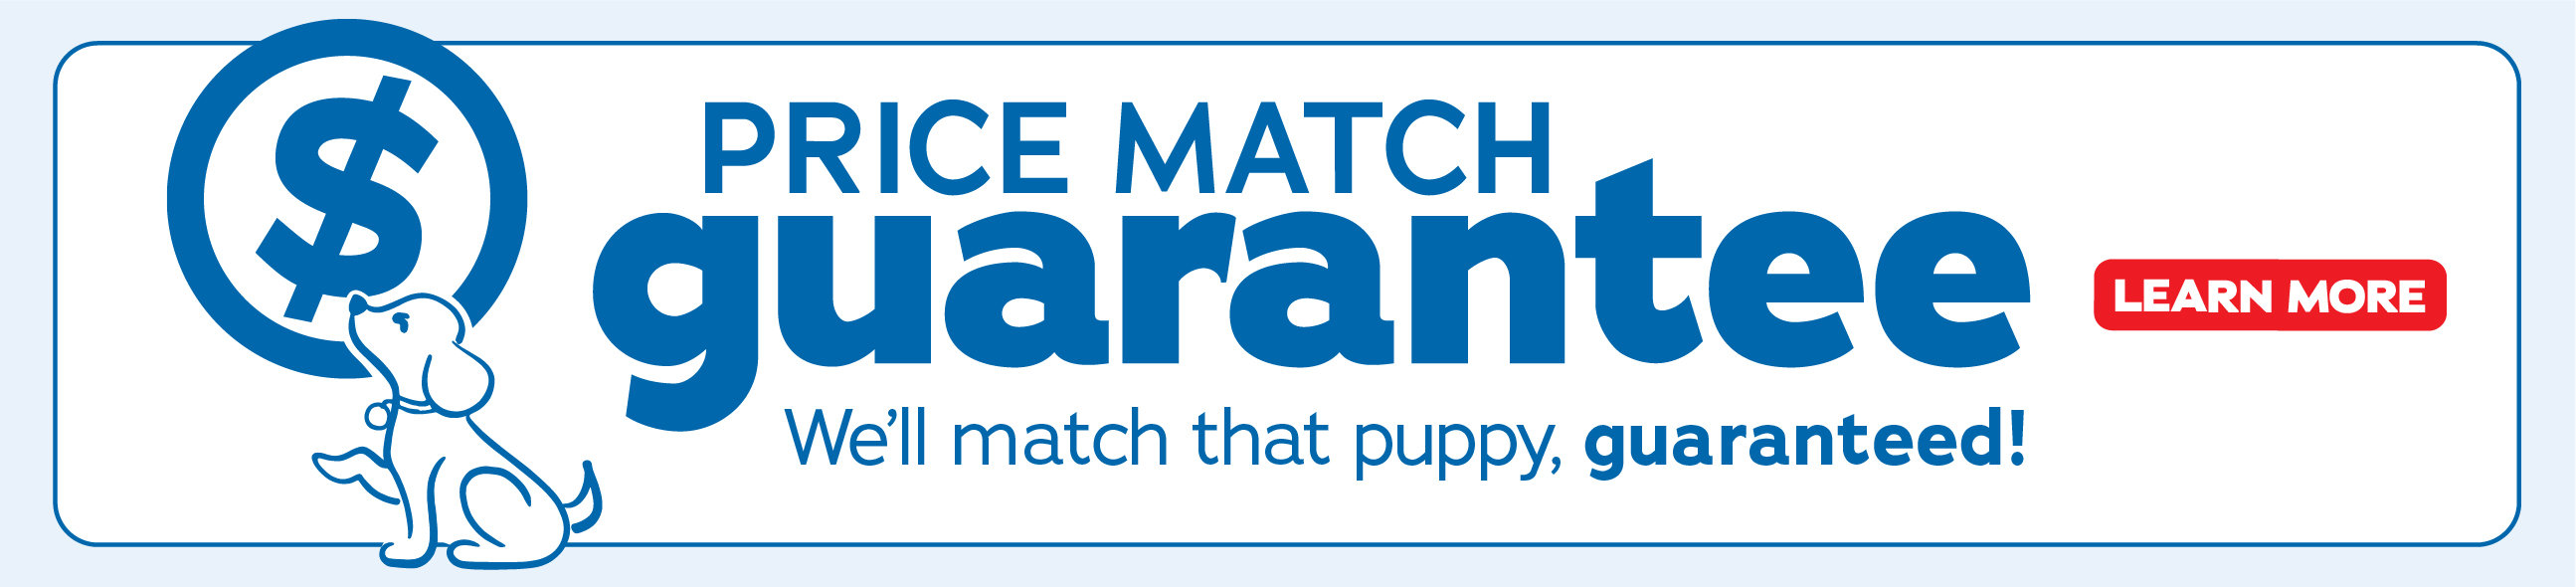 Price Match Guarantee, we'll match that puppy, guaranteed! - Learn More